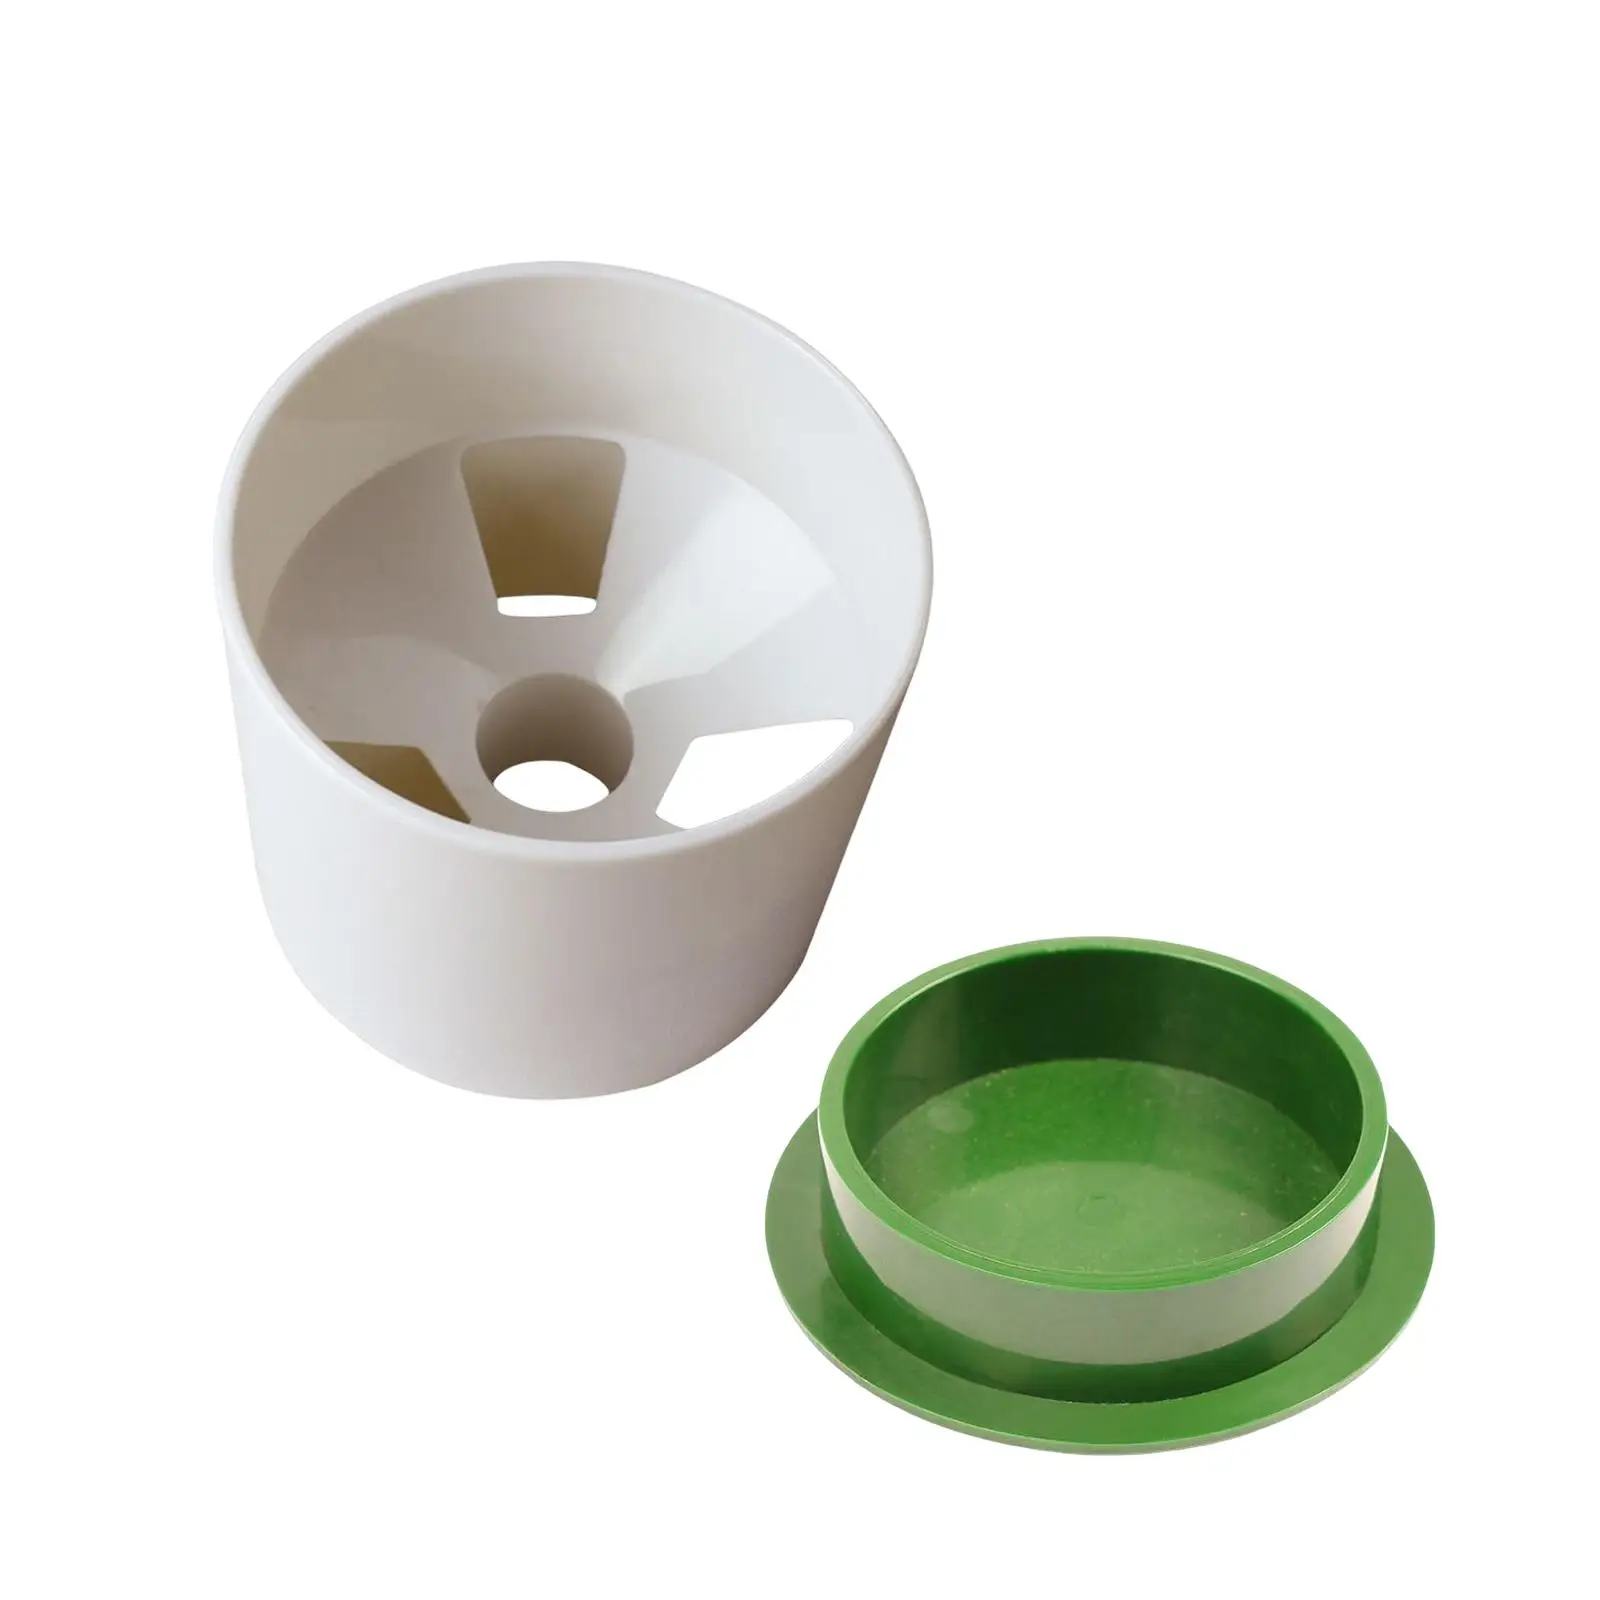  Cups with Lid for Practice Training Aid Backyard Accessories